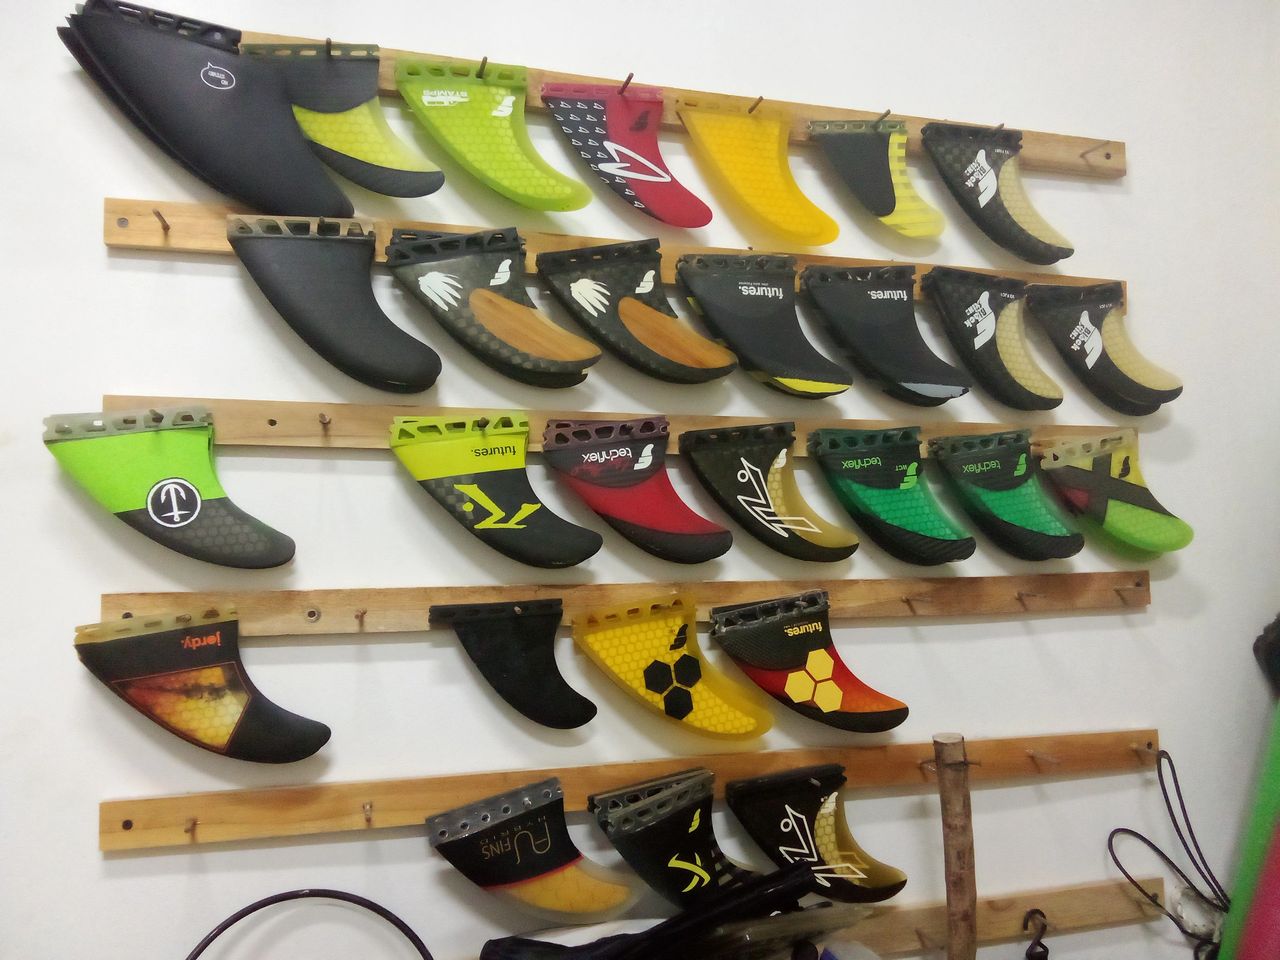 A few thousand dollars worth of fins... wall hangers now..and that's just the future fins, doesn't include the FCS!